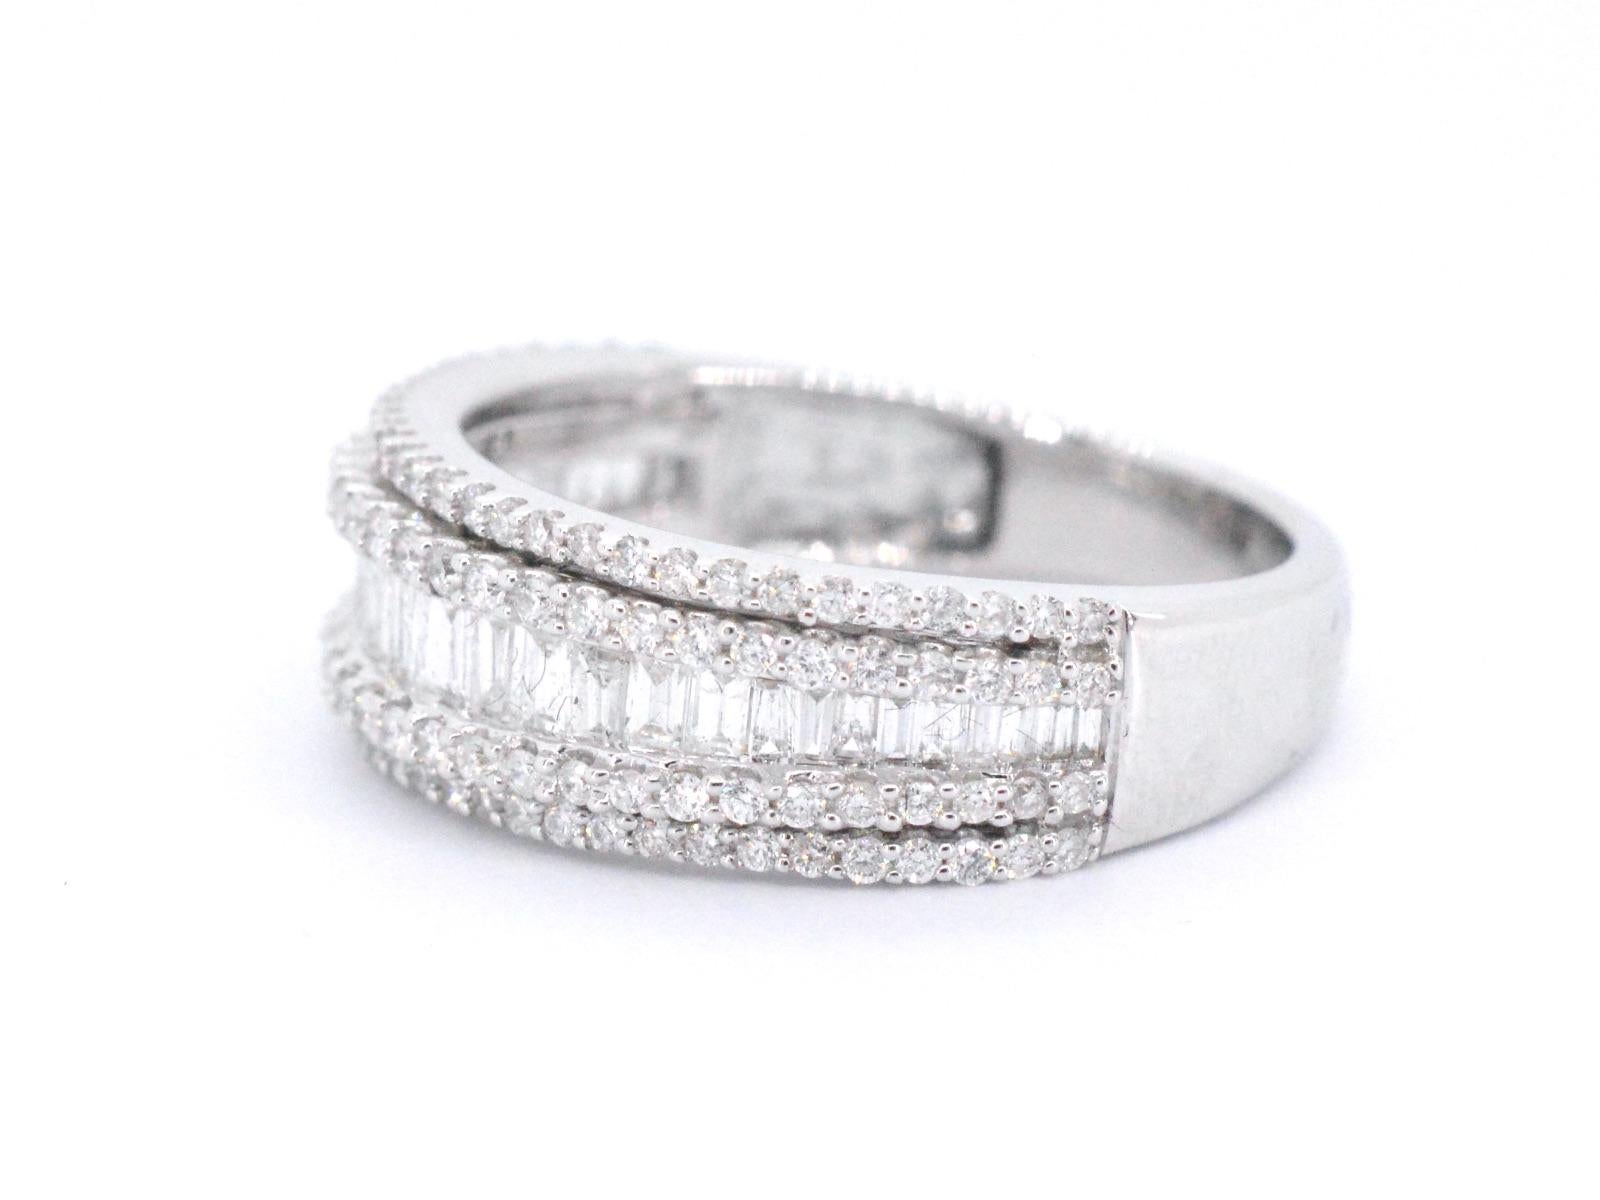 This white gold band ring is made from 14K white gold, a high-quality metal that is known for its strength and durability. The band features five rows of diamonds, with a combination of brilliant and baguette cuts that are selected for their